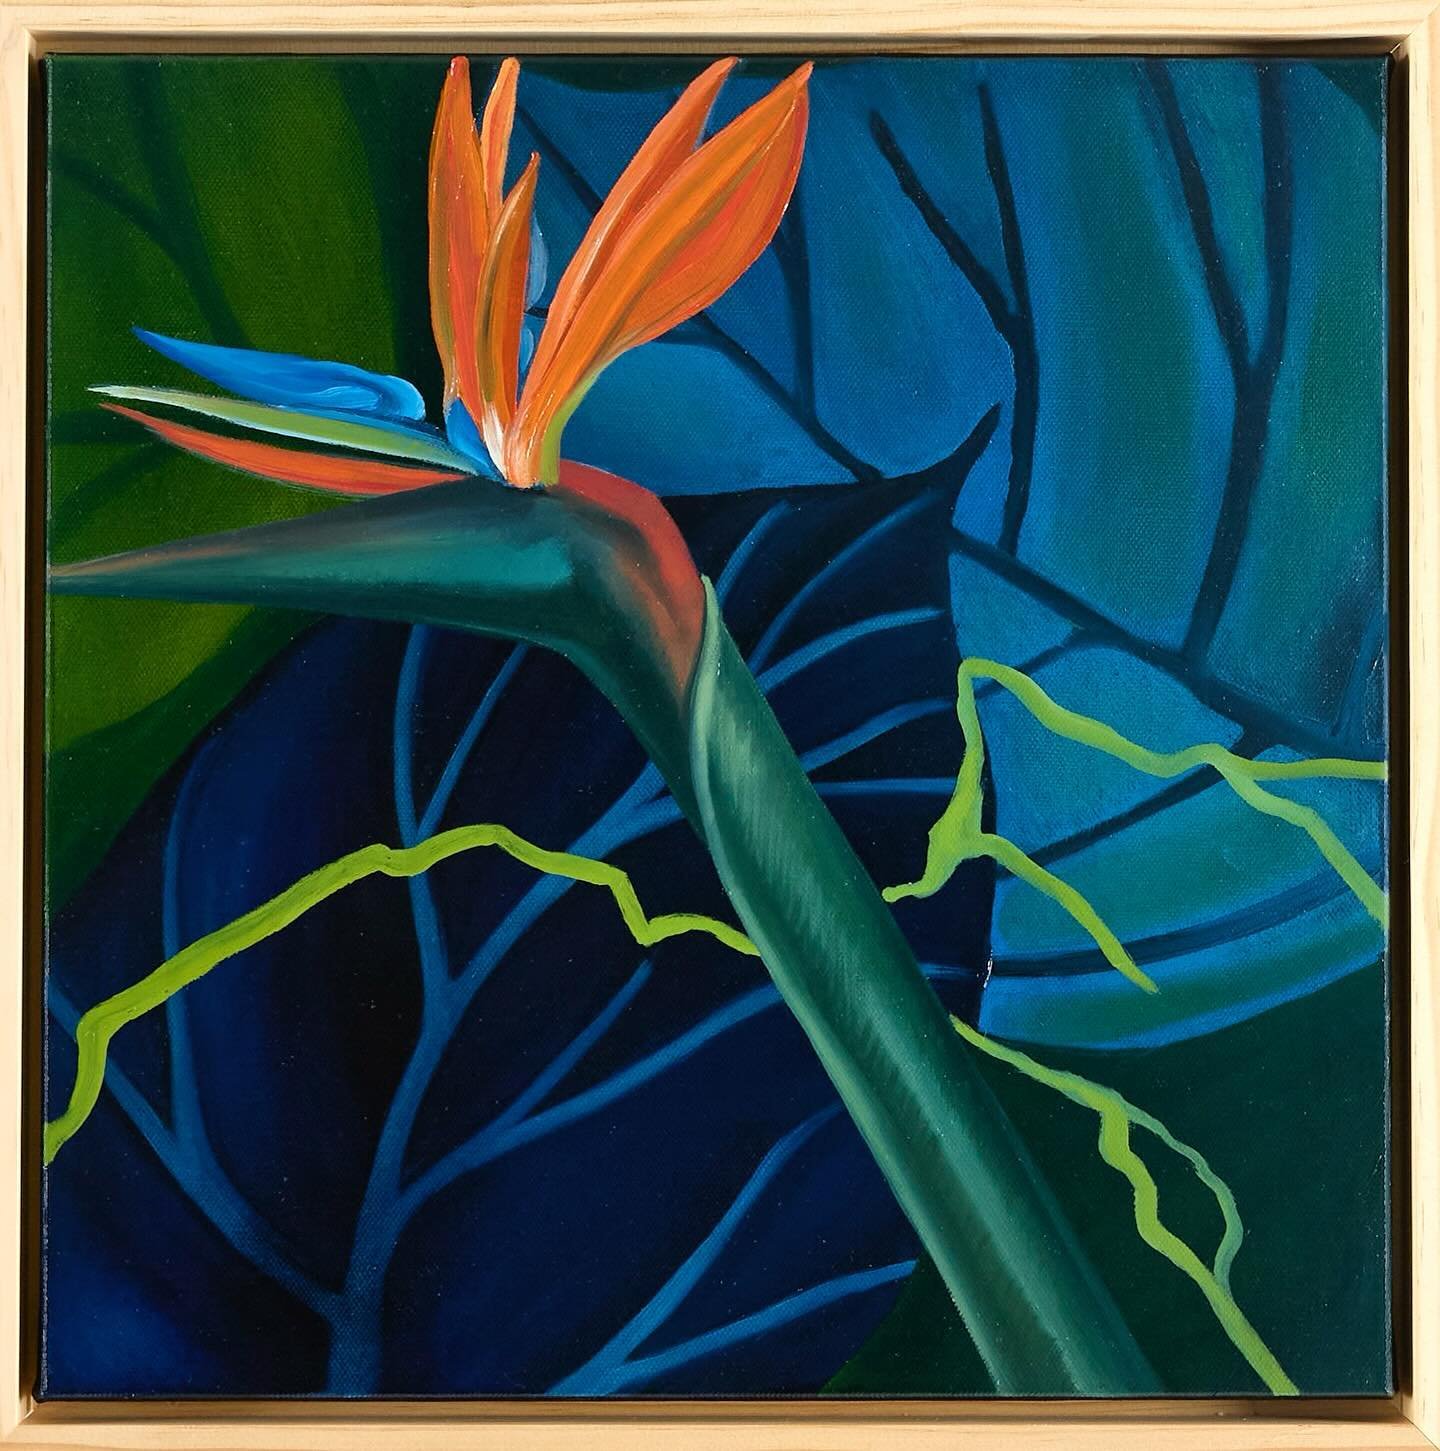 &ldquo;Frida&rsquo;s Bird of Paradise&rdquo;
Oil on canvas, 16x16 inches, framed. Women of Vision Collection 2024